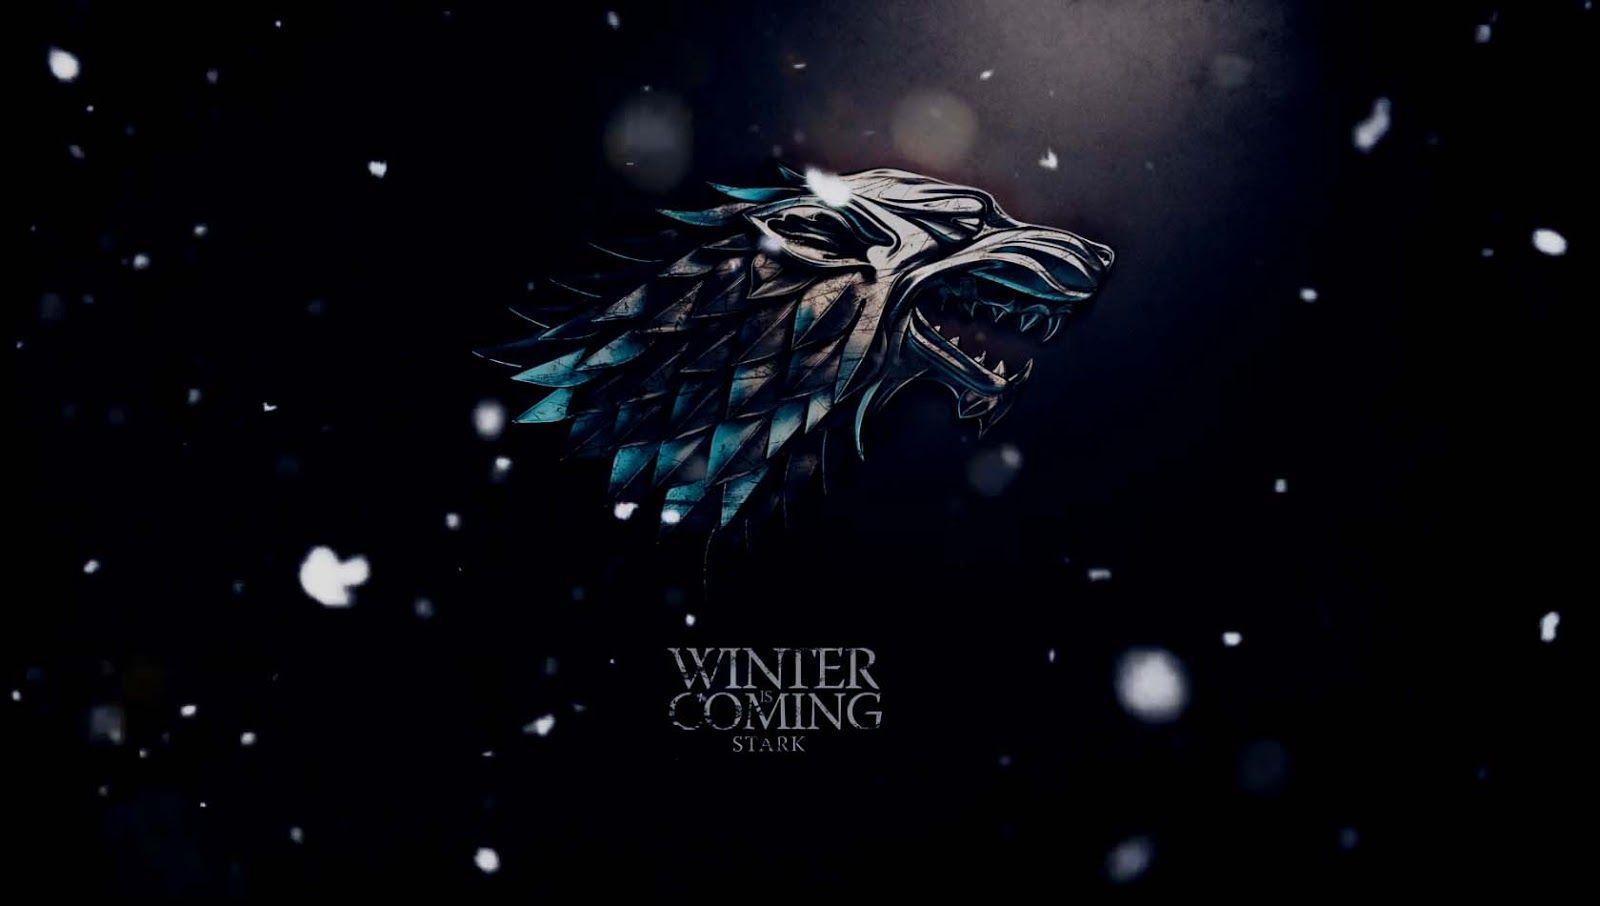 Game Of Thrones Wallpaper Engine Free. Wallpaper pc